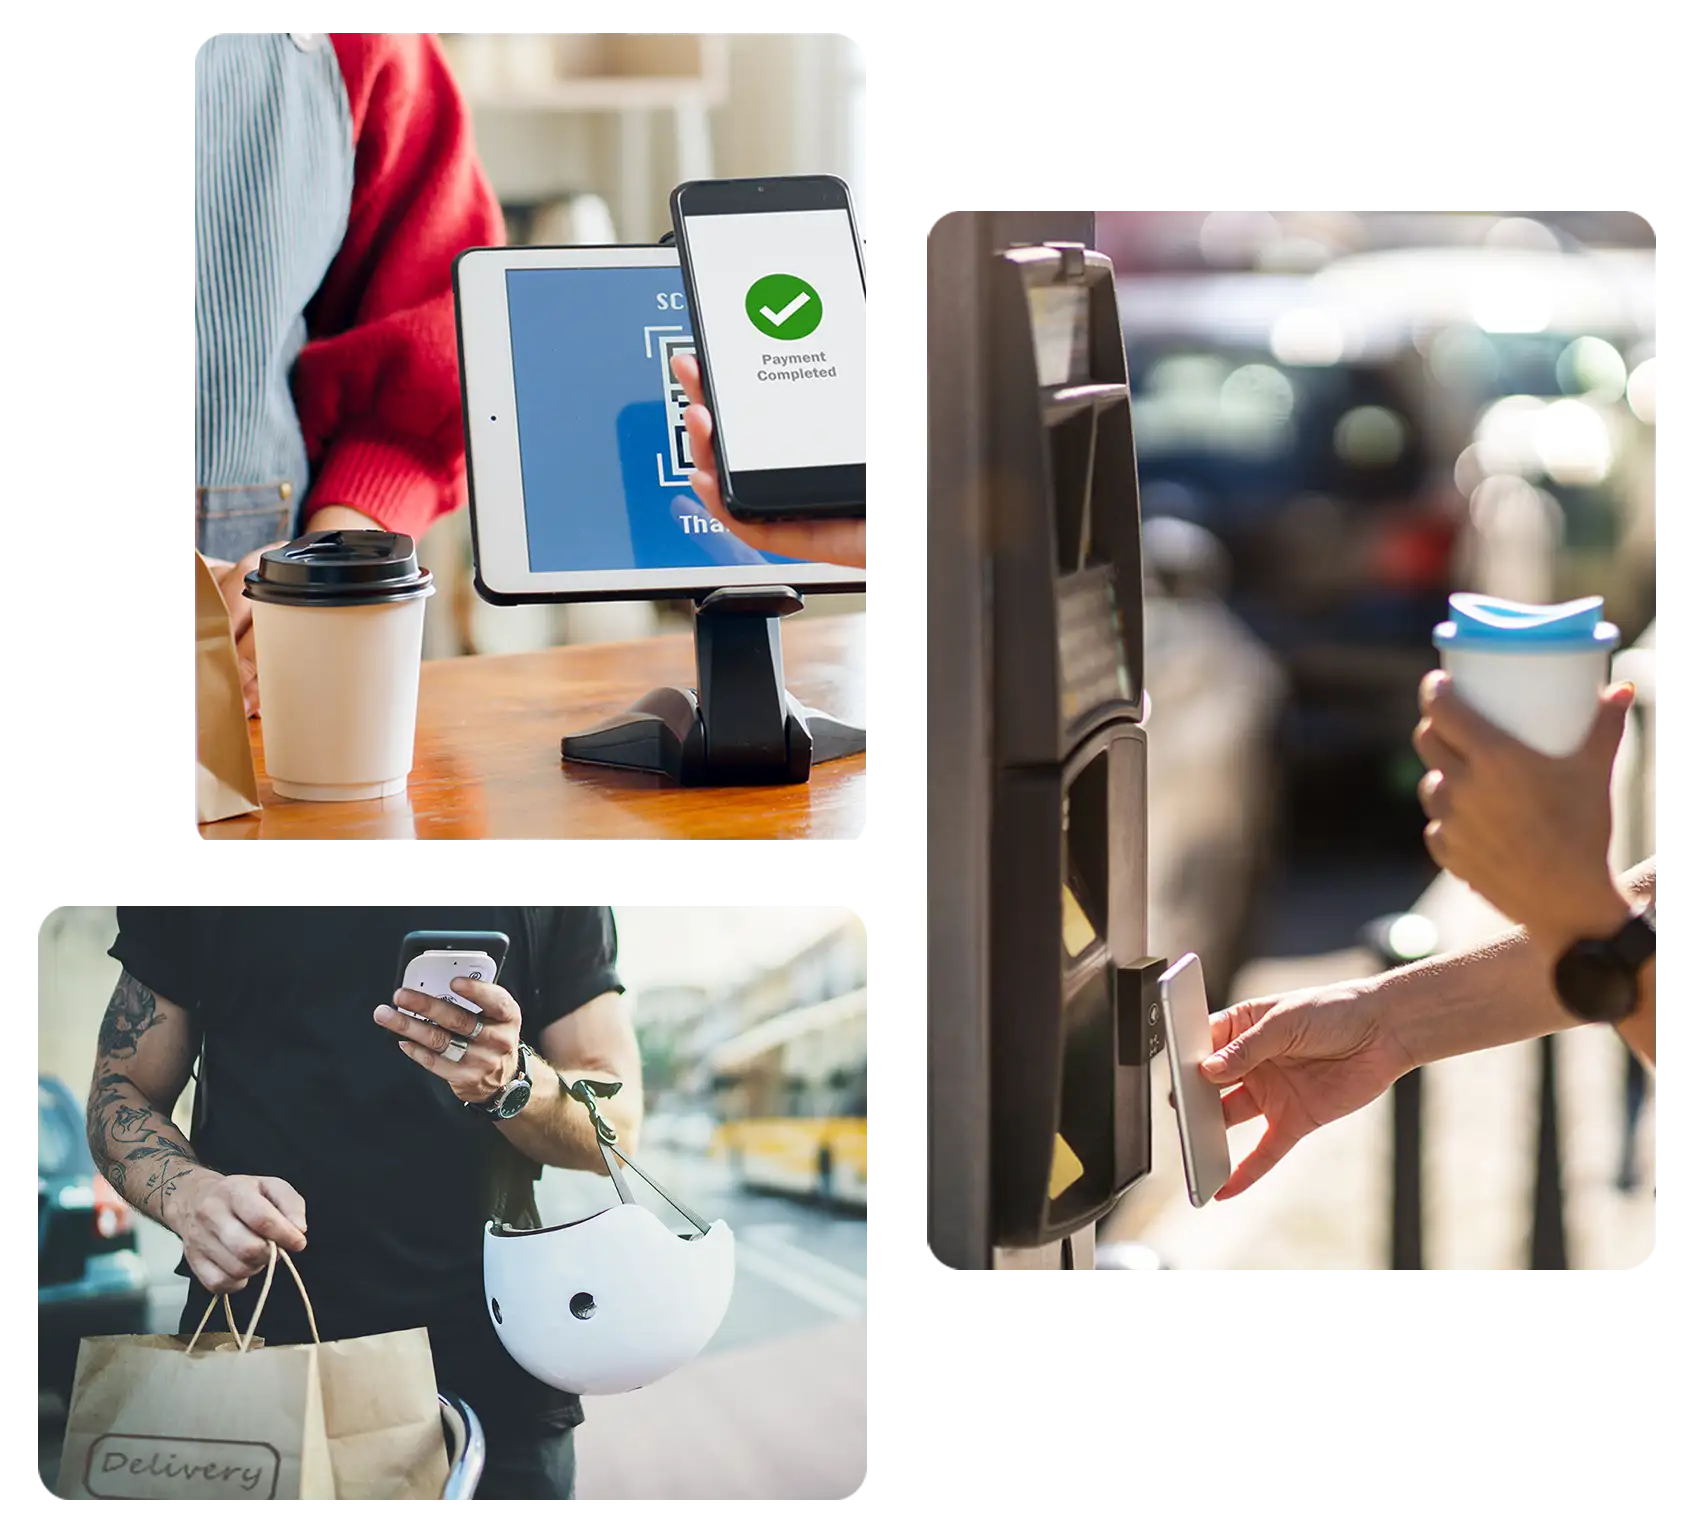 An image collage with a larger image on the right and two smaller images stacked on top of each other to the left. The top-left image shows a person using their smartphone to tap-to-pay on a tablet at a cafe. The bottom-right image displays a person carrying a shopping bag while using their smartphone and walking on a sidewalk. The image to the right depicts a person using their smartphone to tap-to-pay at an outdoor kiosk.